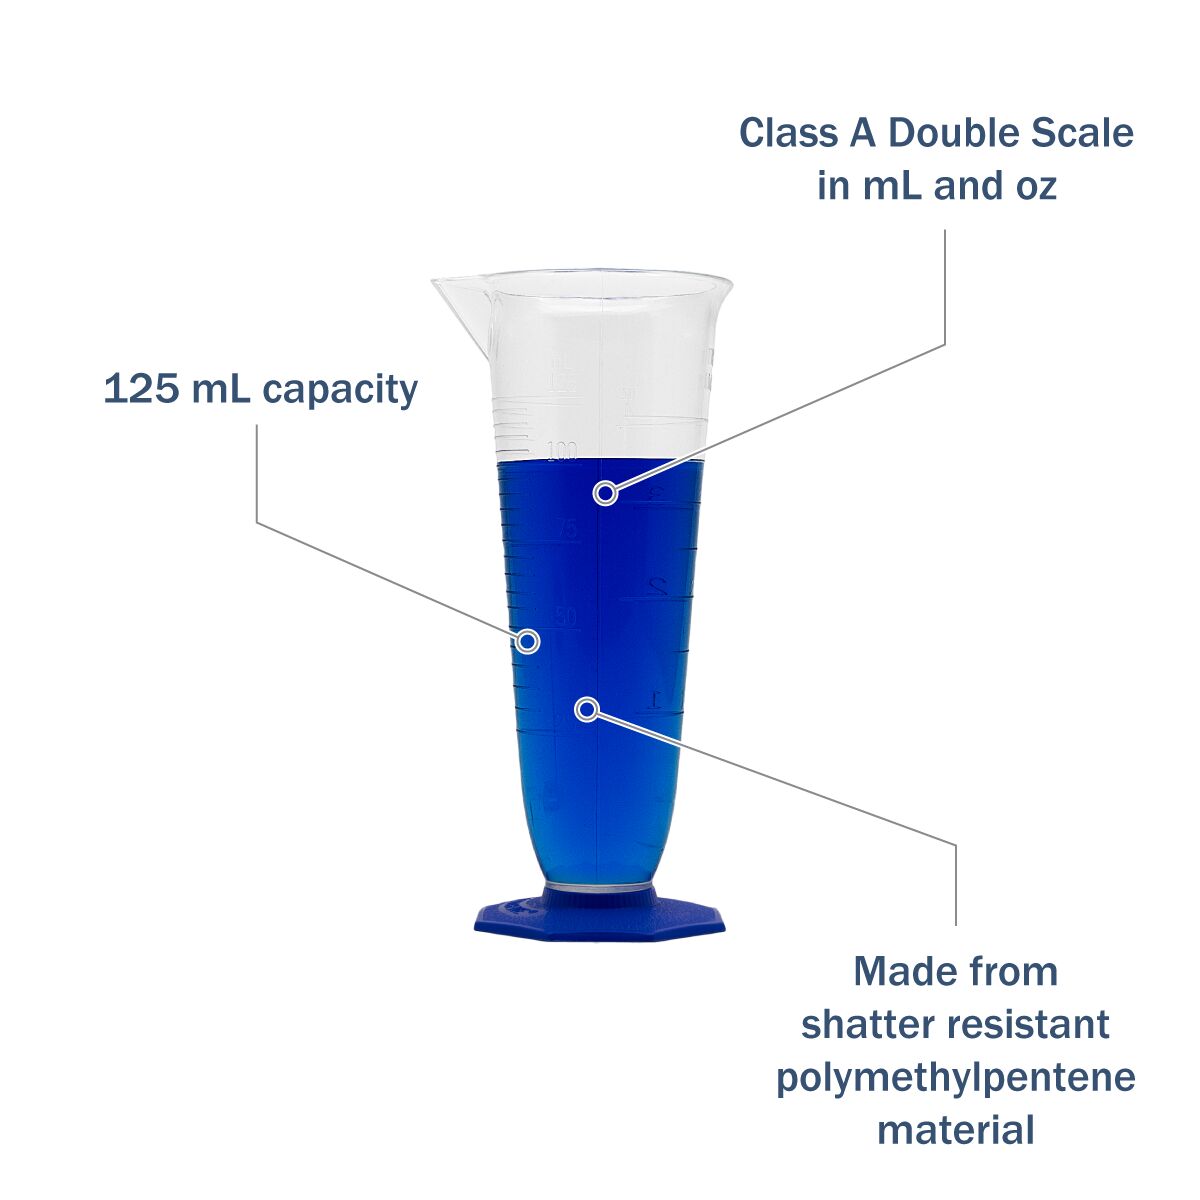 Double-Scale Polymethylpentene Pharmaceutical Graduate 125 mL features